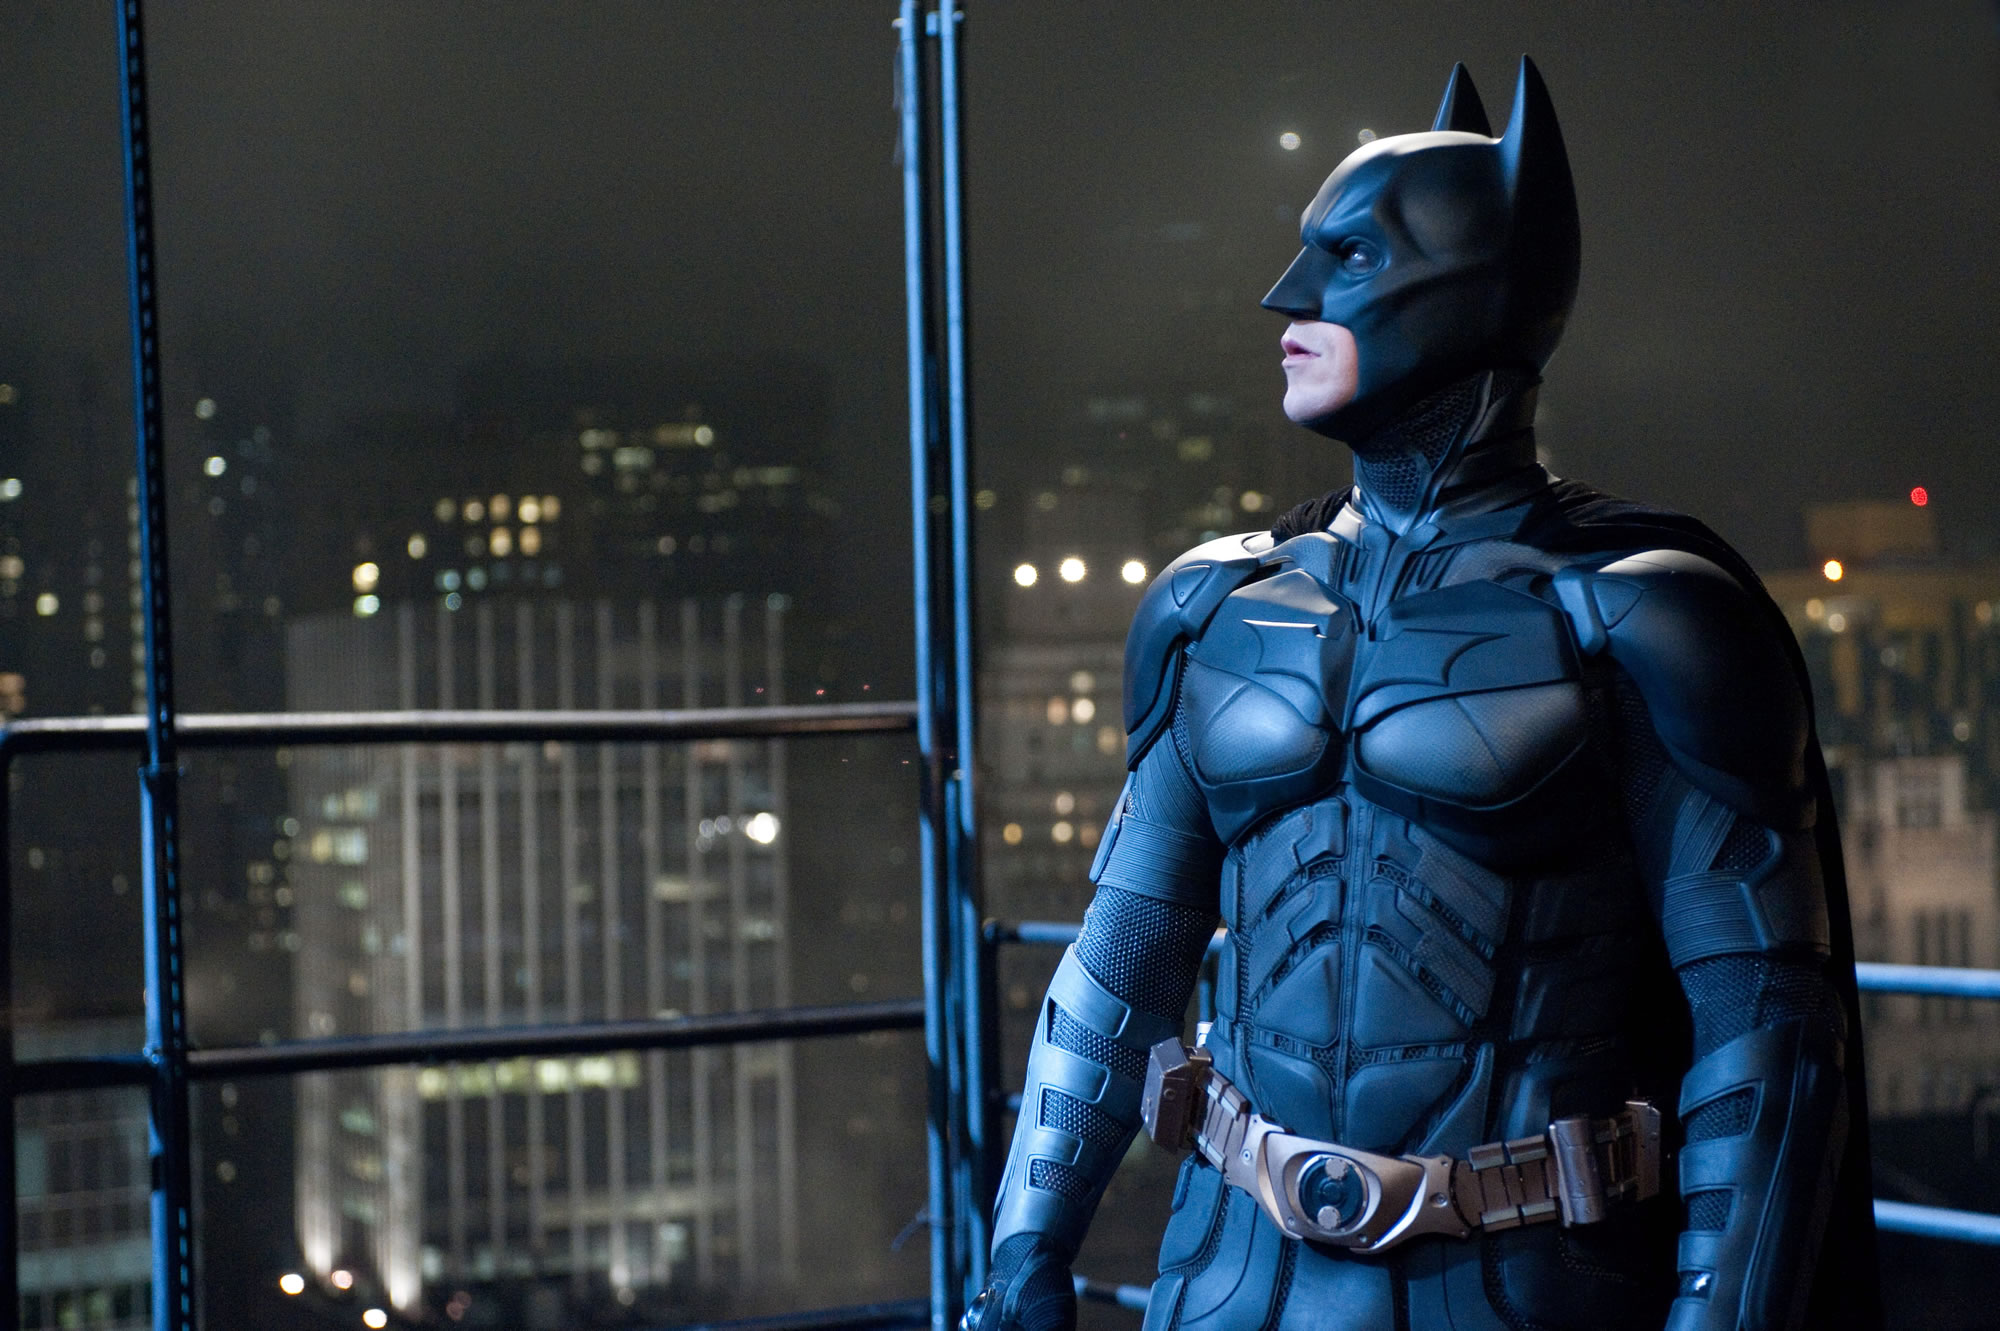 Christian Bale portrays Bruce Wayne and his alter ego, Batman, in &quot;The Dark Knight Rises.&quot;